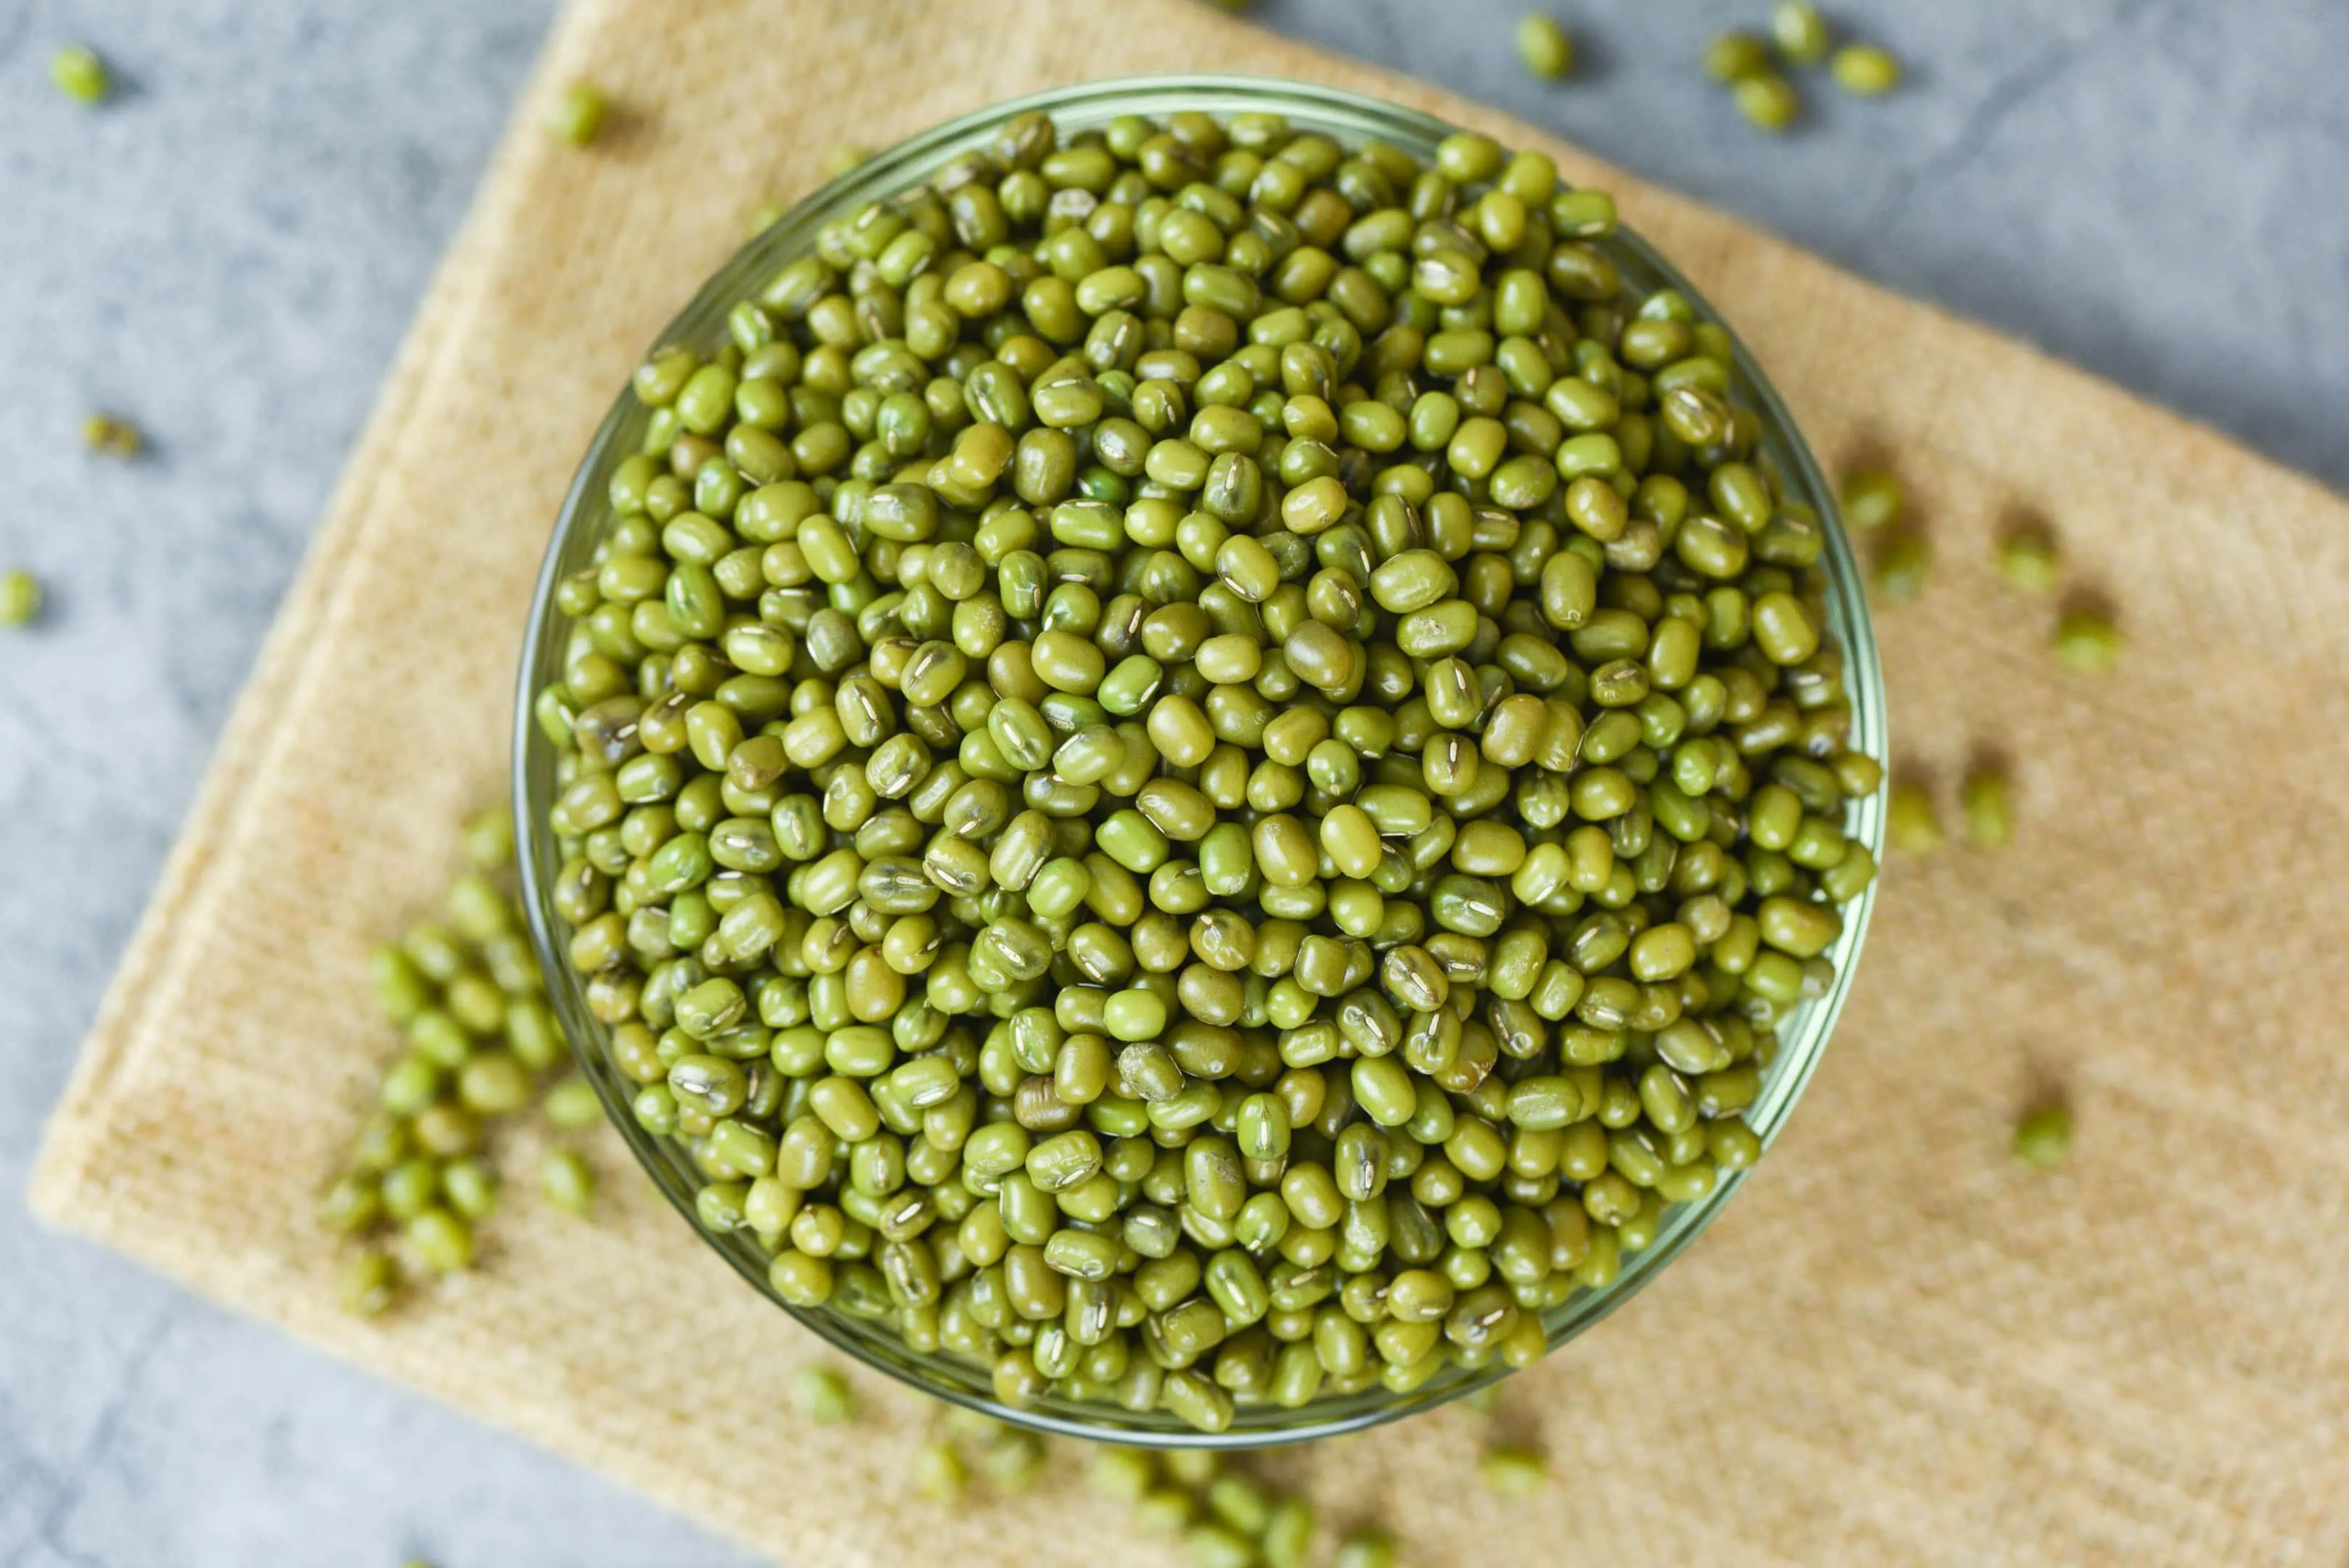 Green mung beans in a bowl on gray table